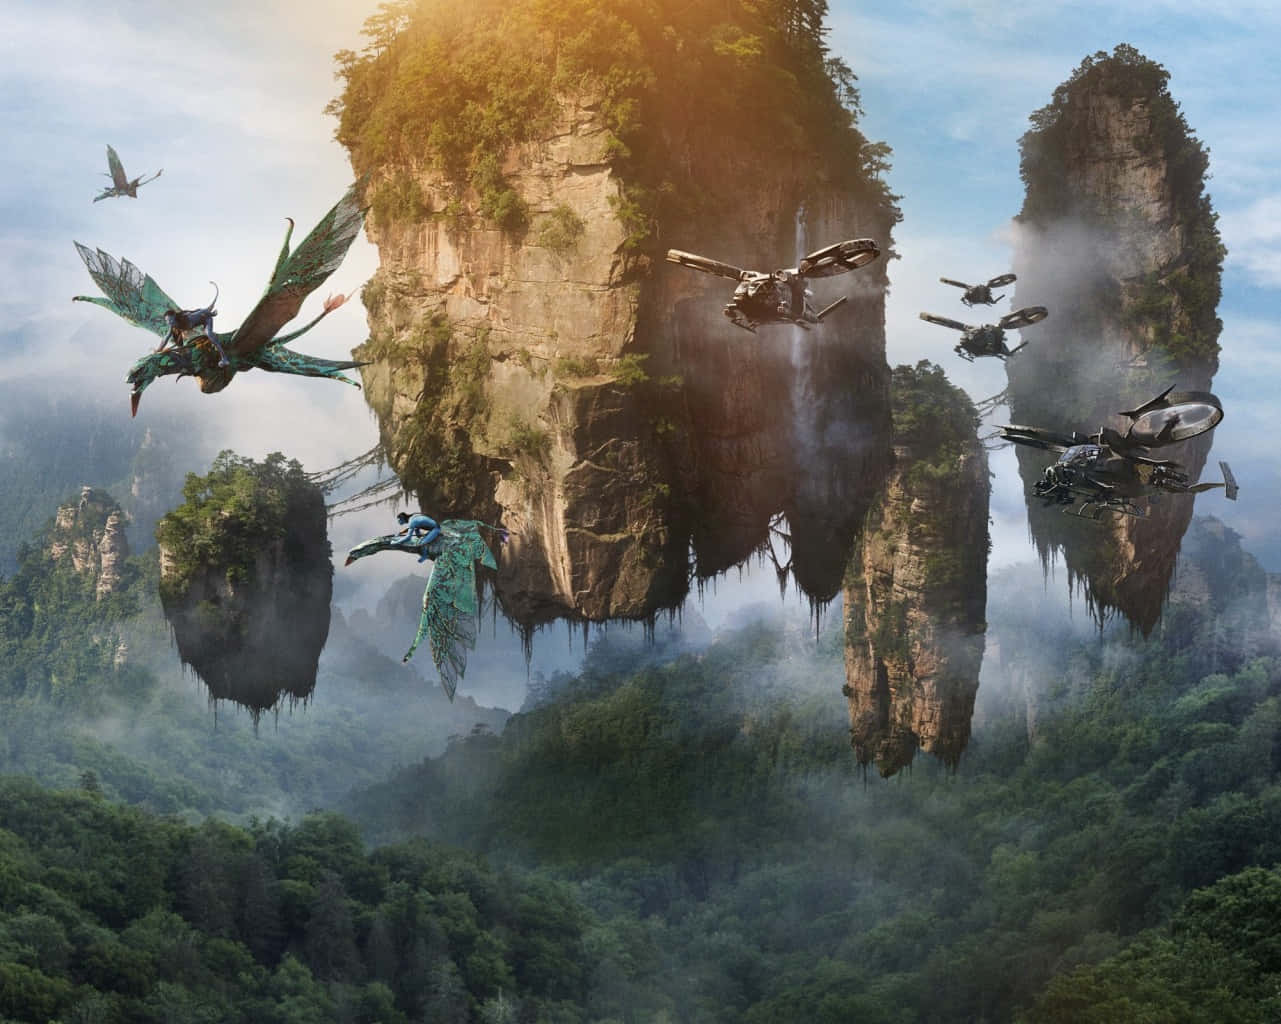 A bird's-eye view of the magical planet of Pandora from Avatar Wallpaper